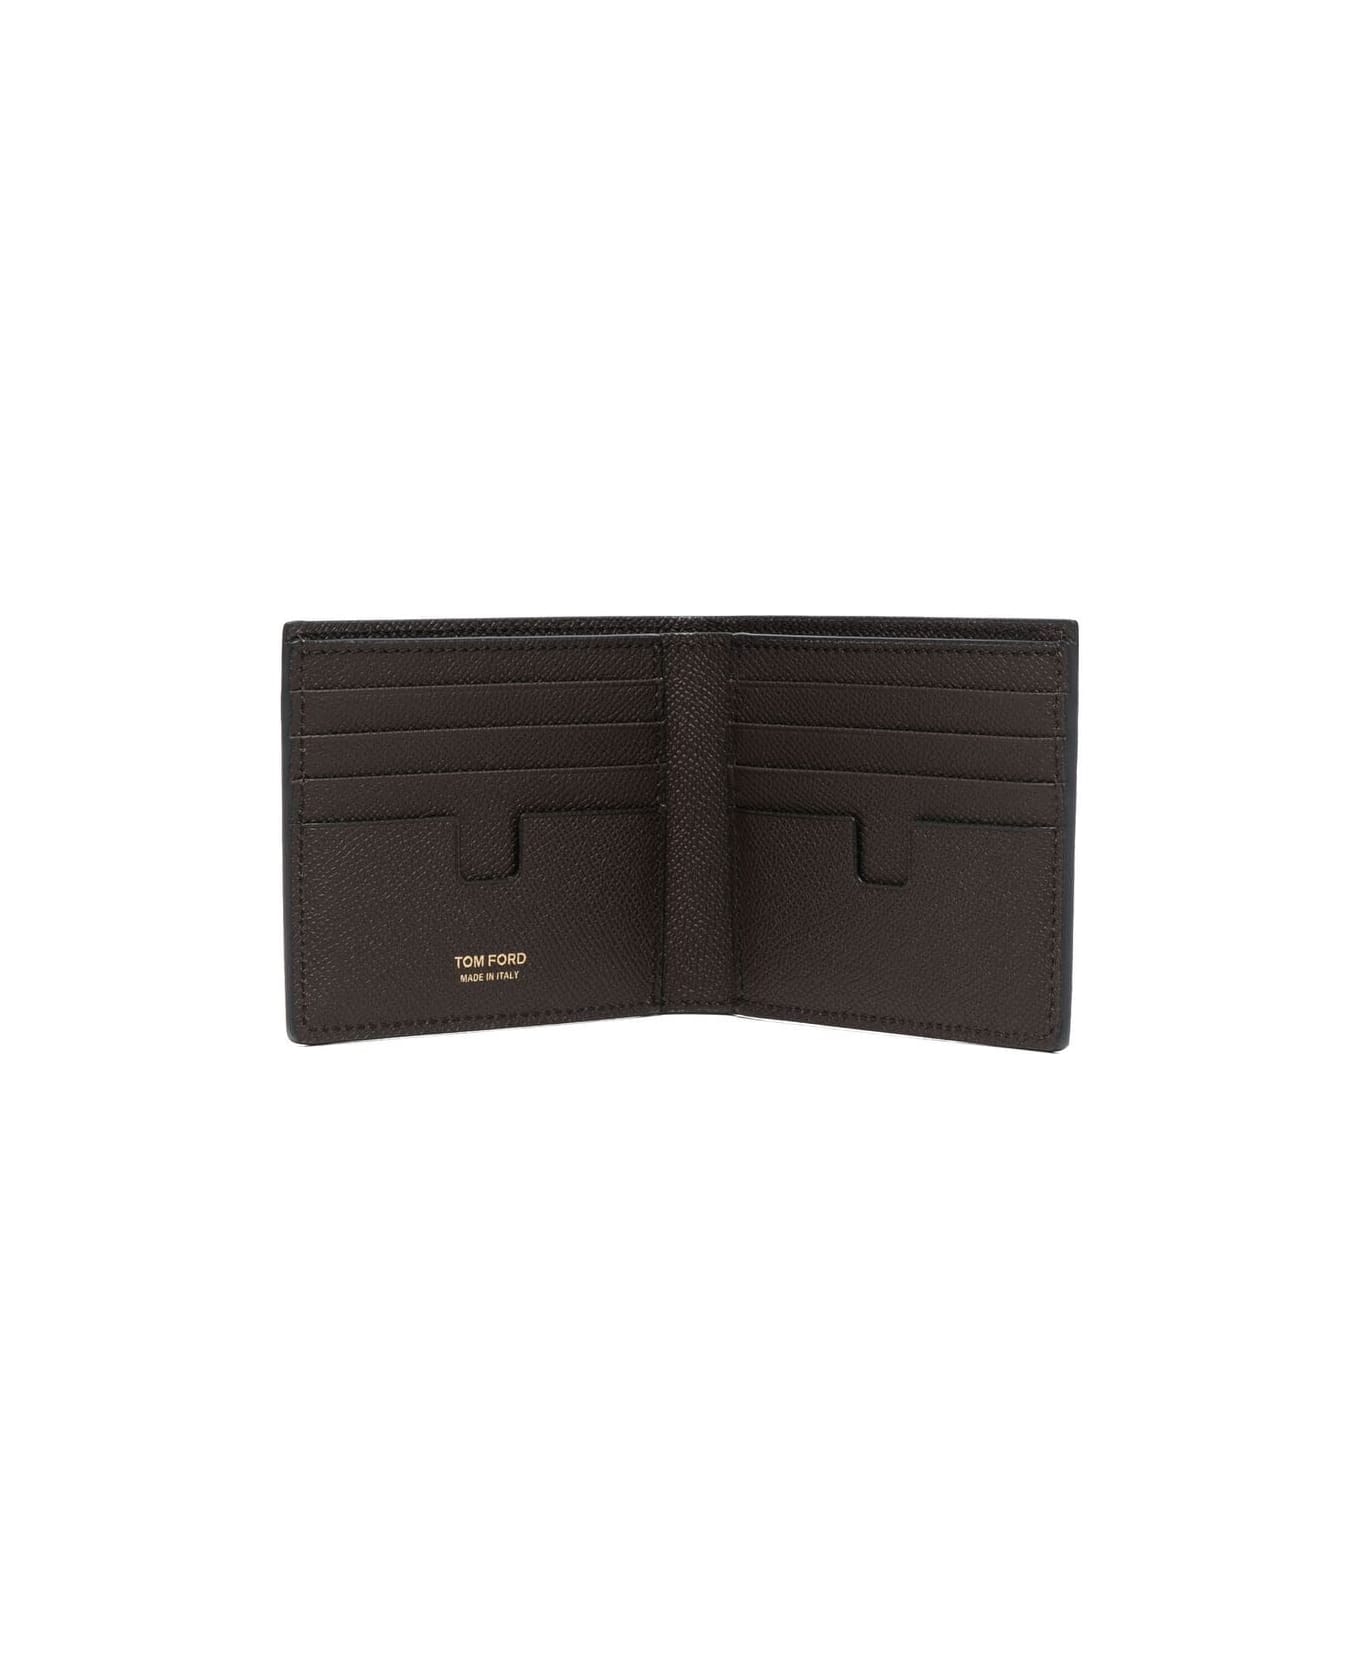 Tom Ford Wallet - Chocolate